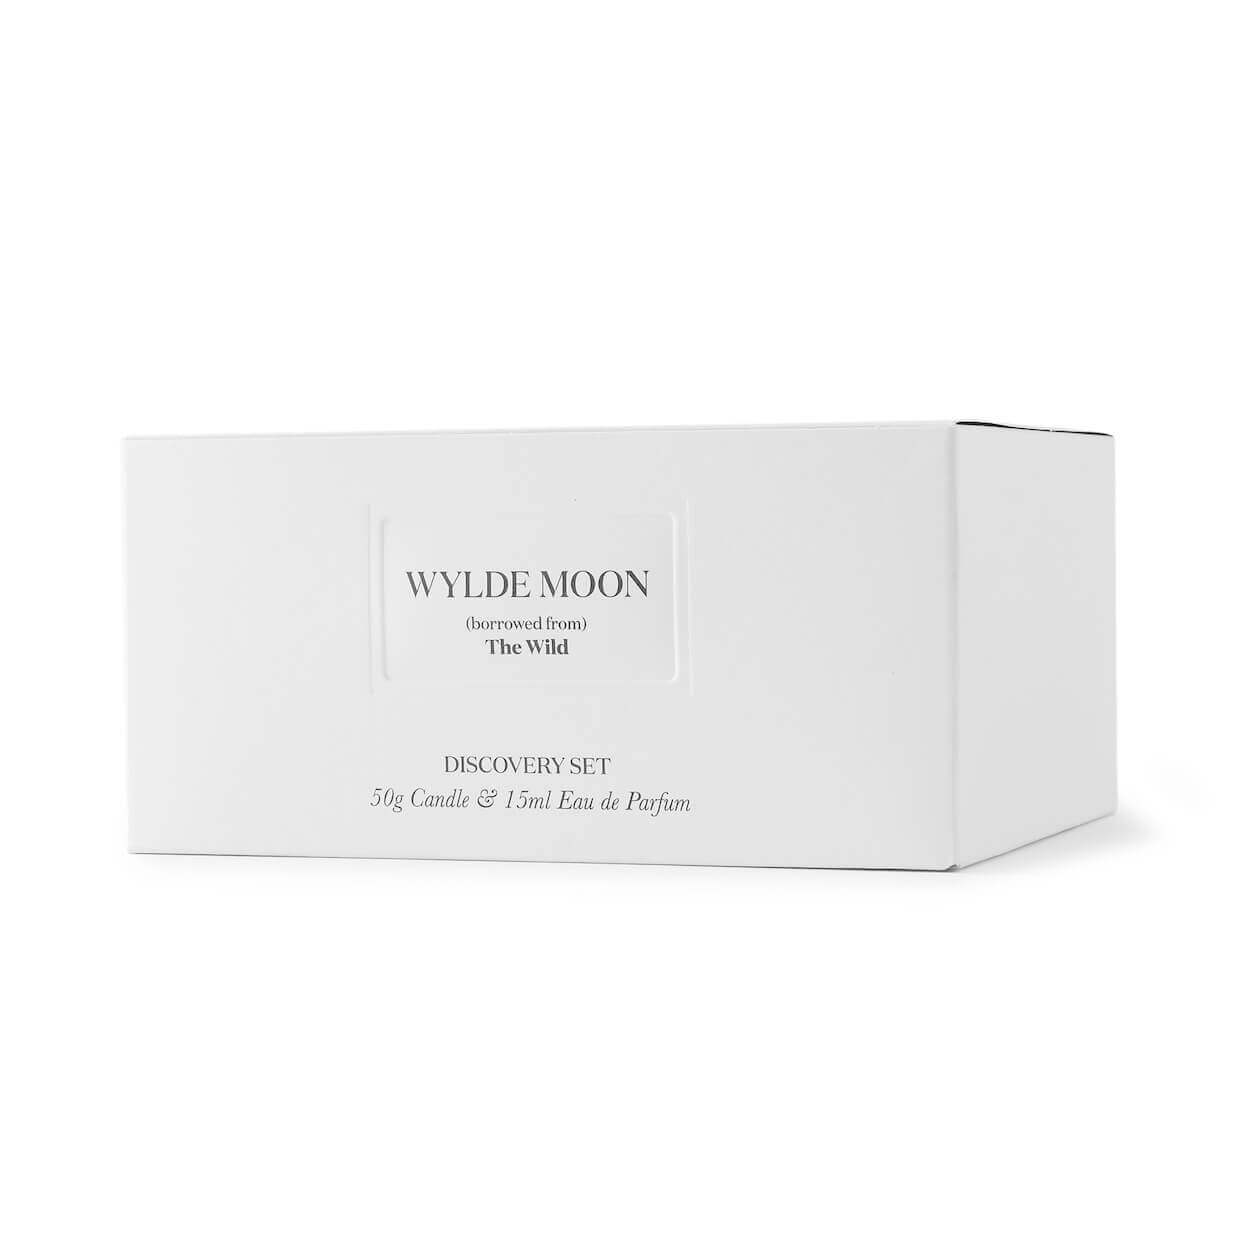 Travel size candle and perfume set from WYLDE MOON